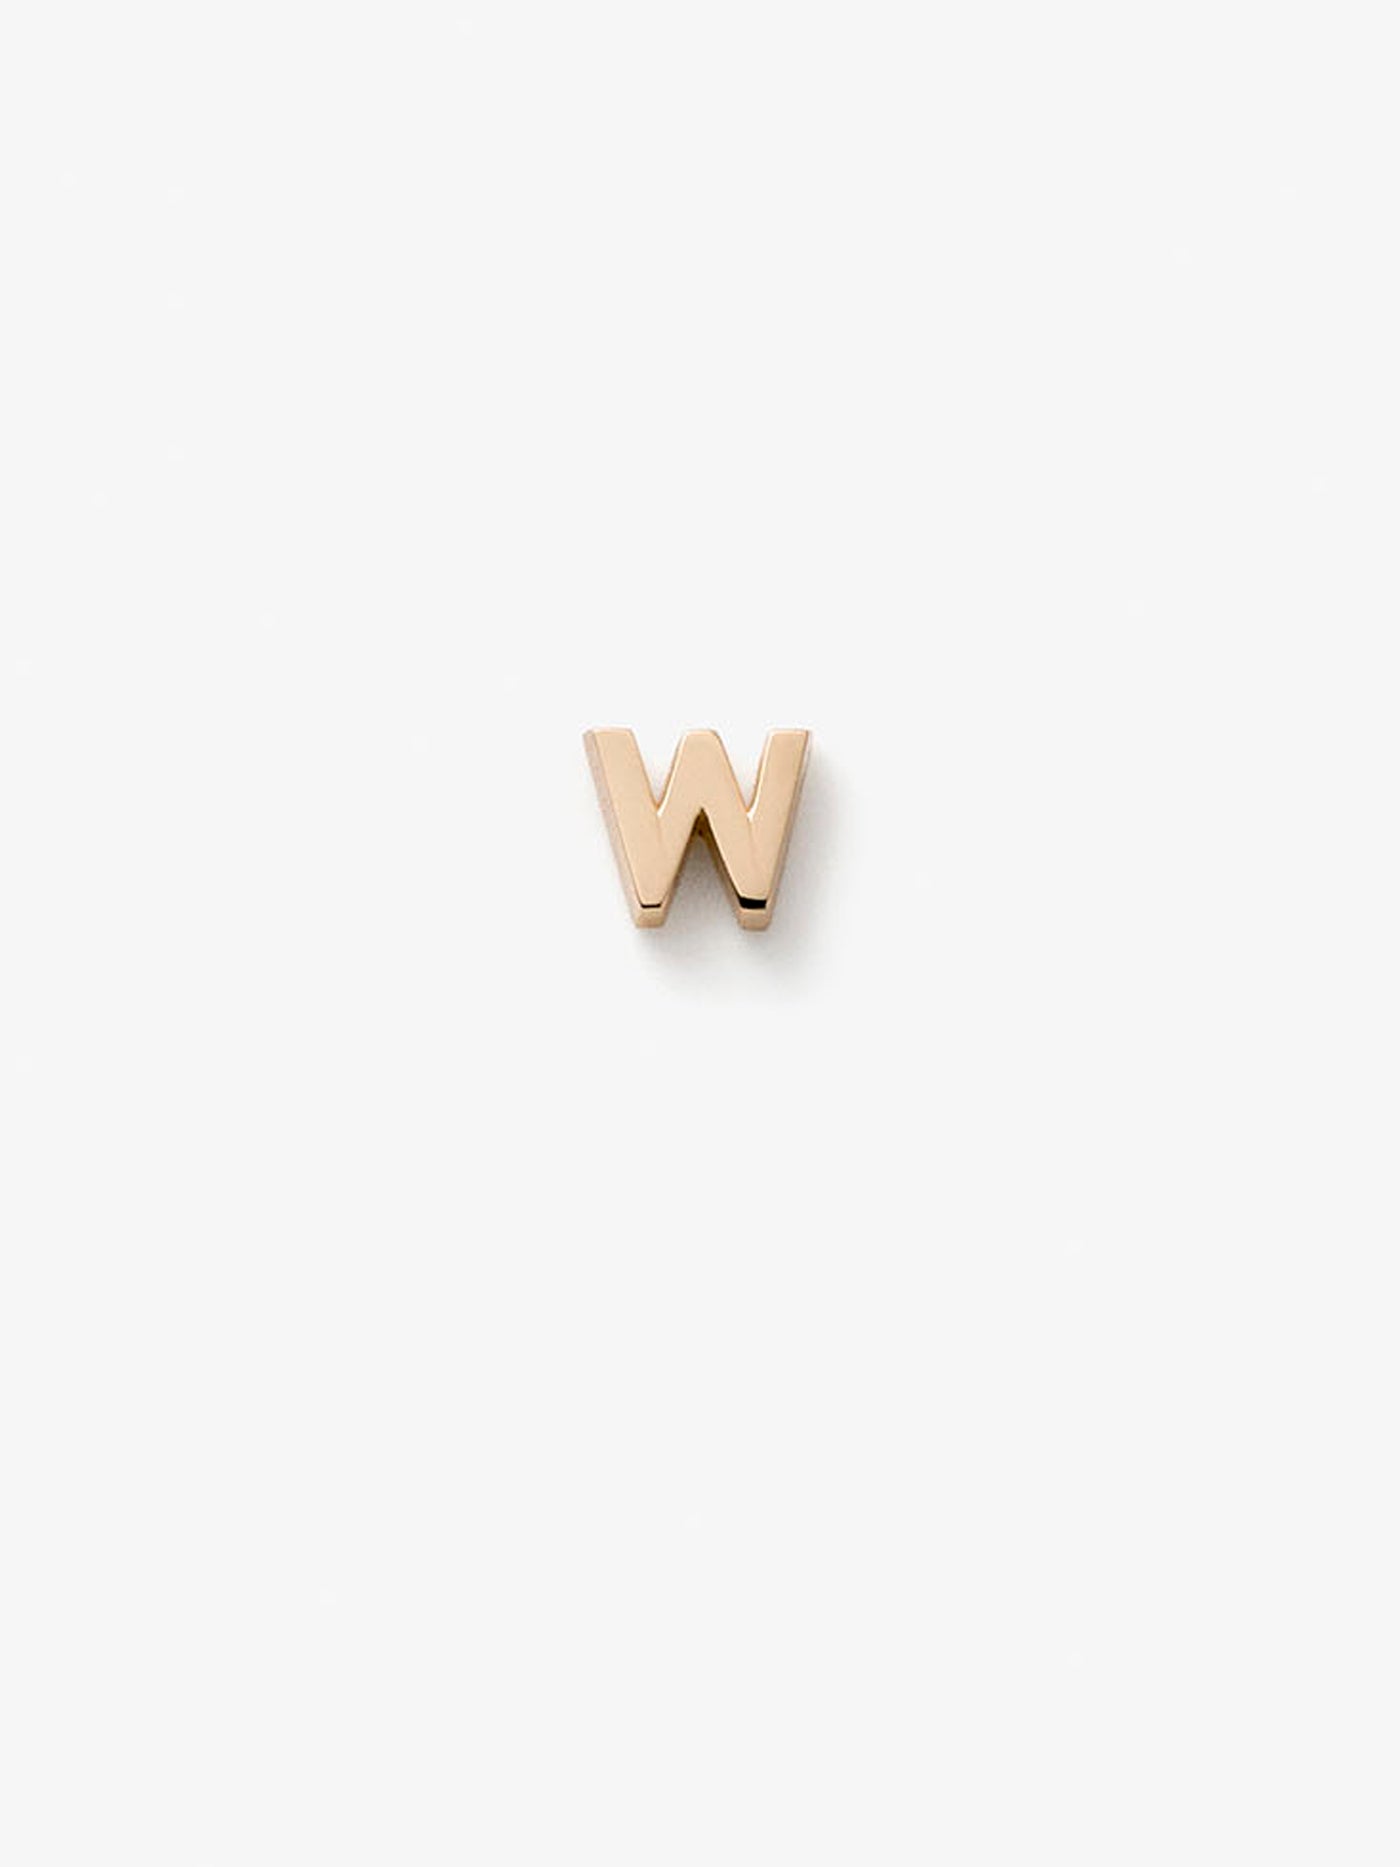 One Letter W in 18k Gold